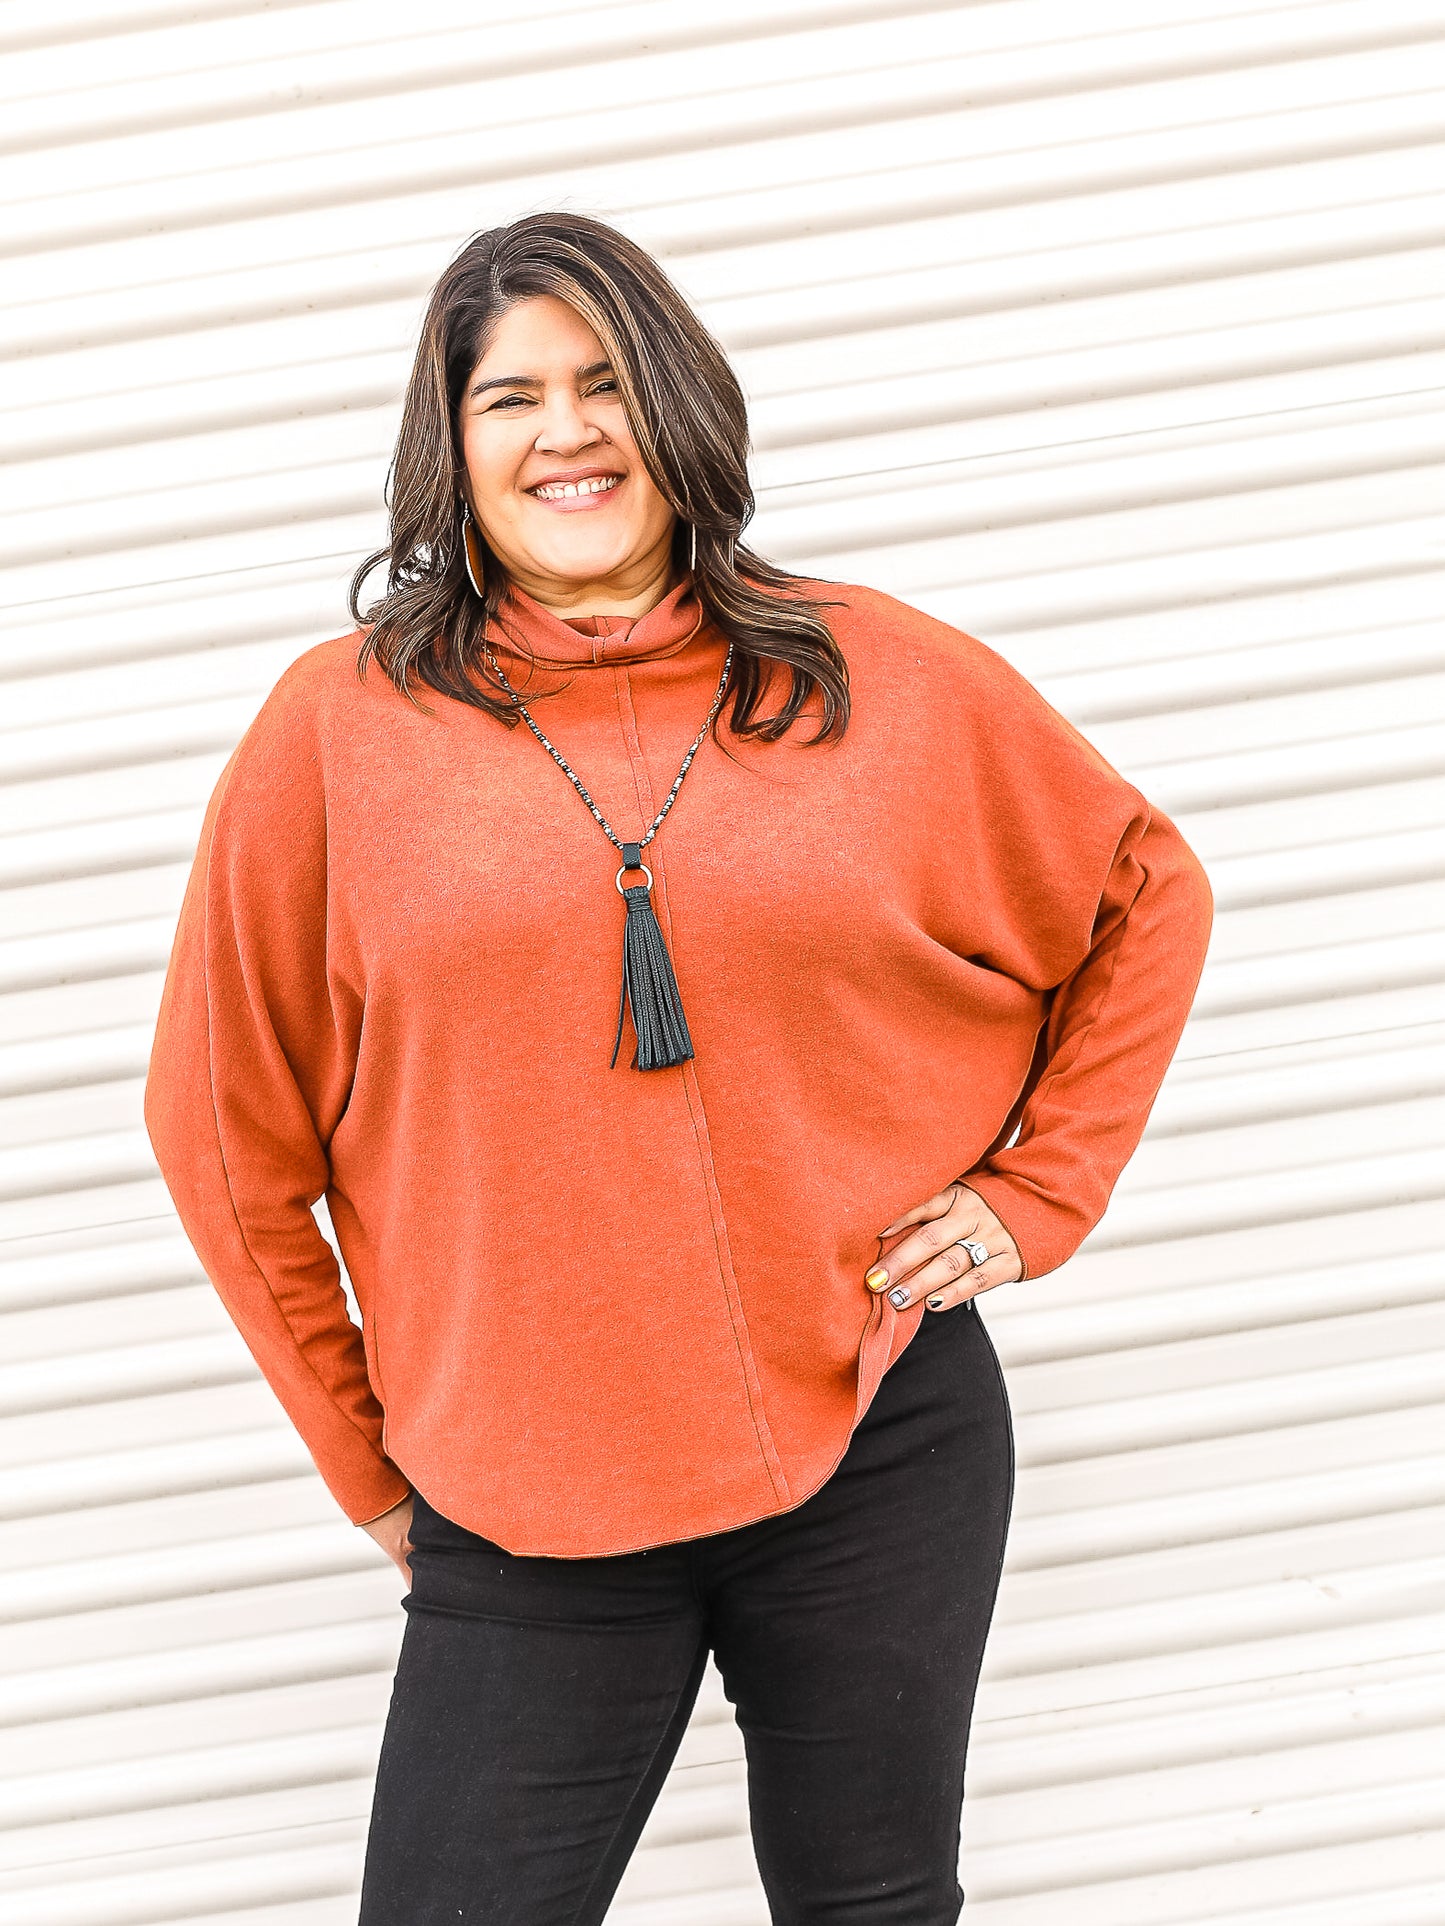 Orange dolman sweater with cowl neck styled with black jeans.